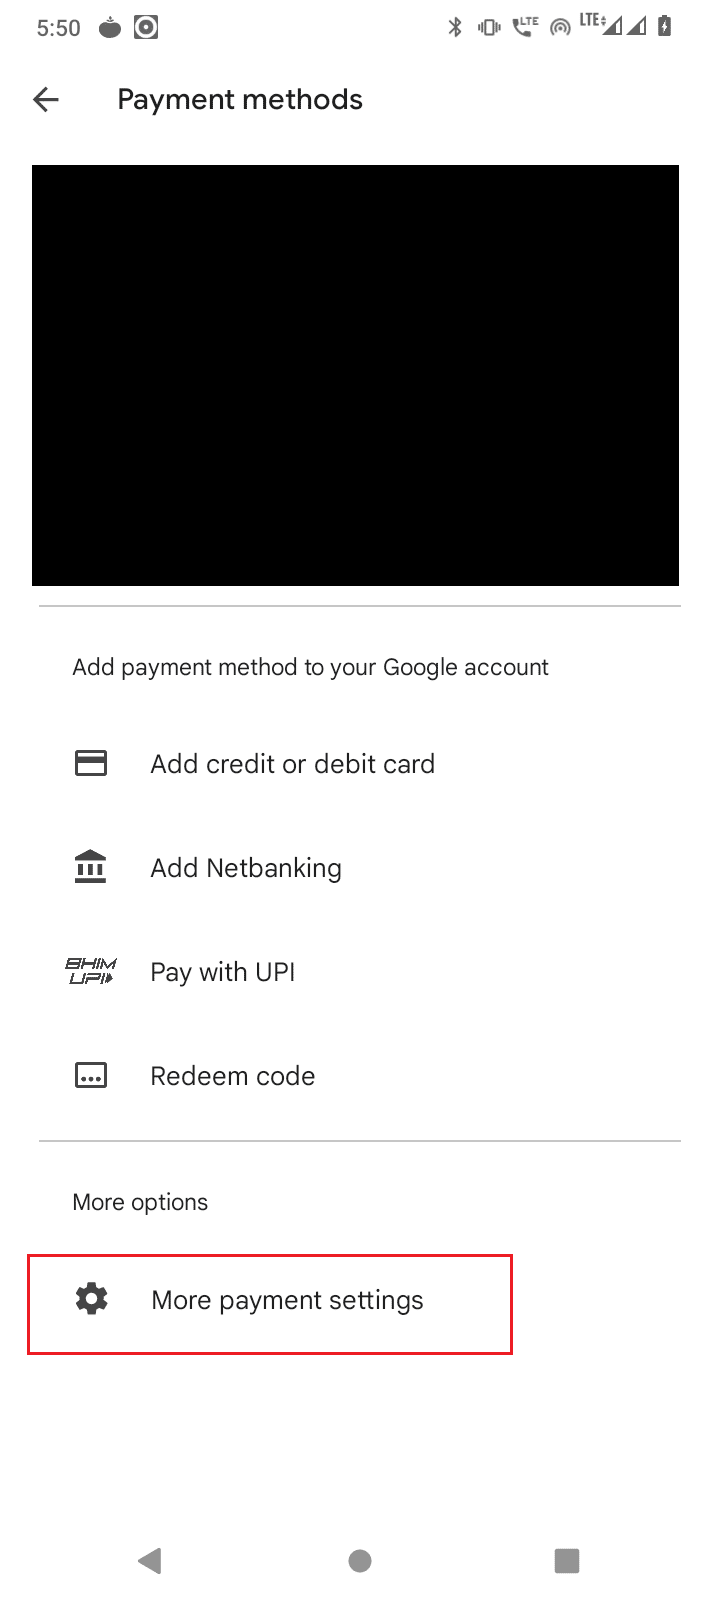 tap more payment settings